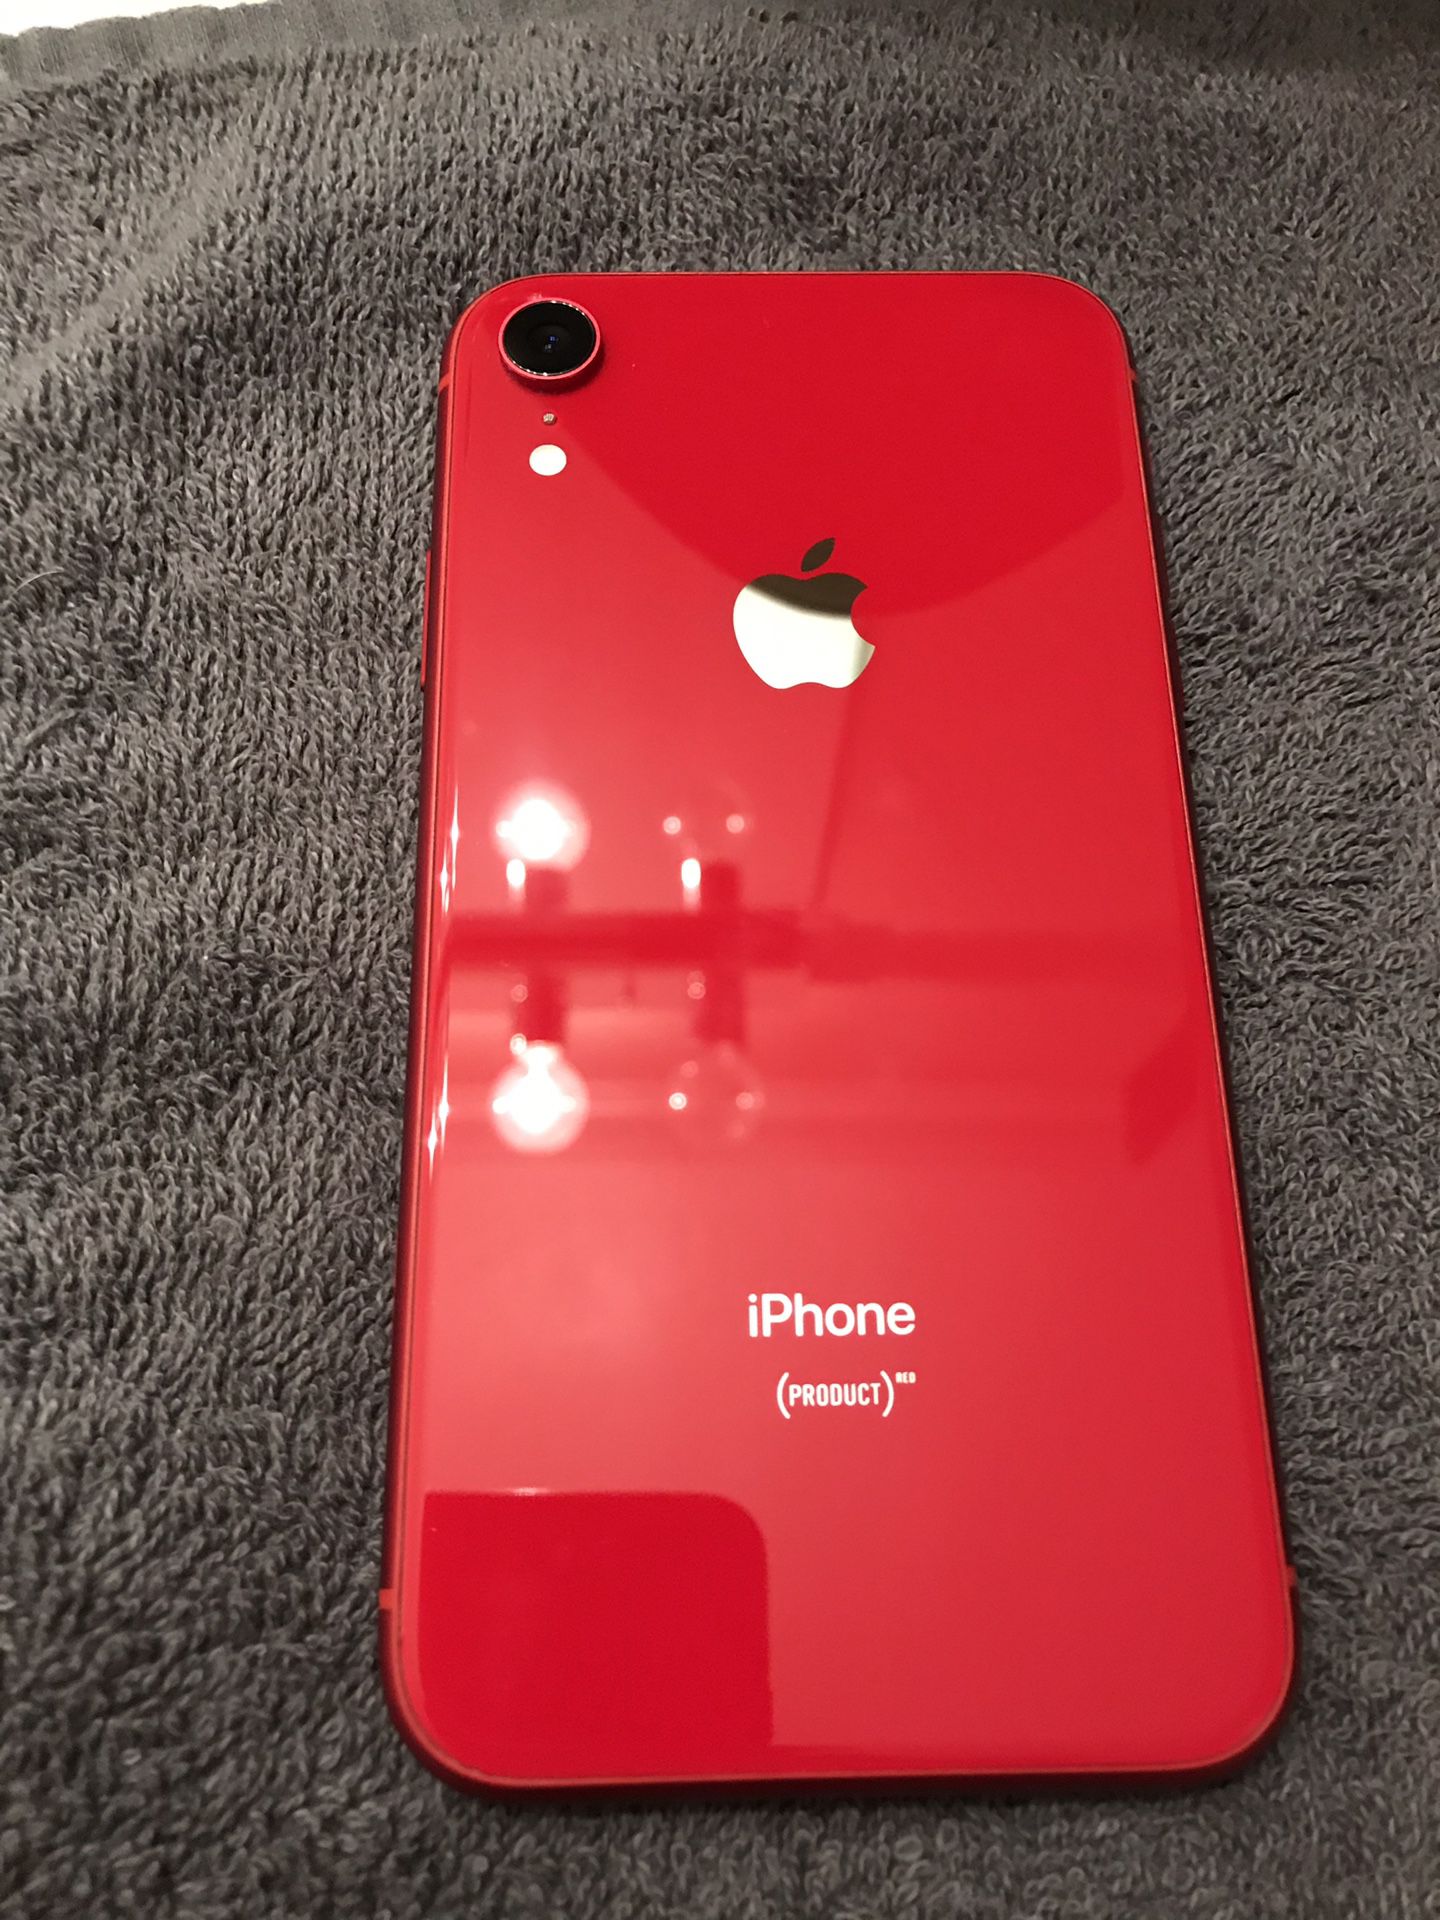 iPhone XR Red 64gb for Sale in Houston, TX - OfferUp